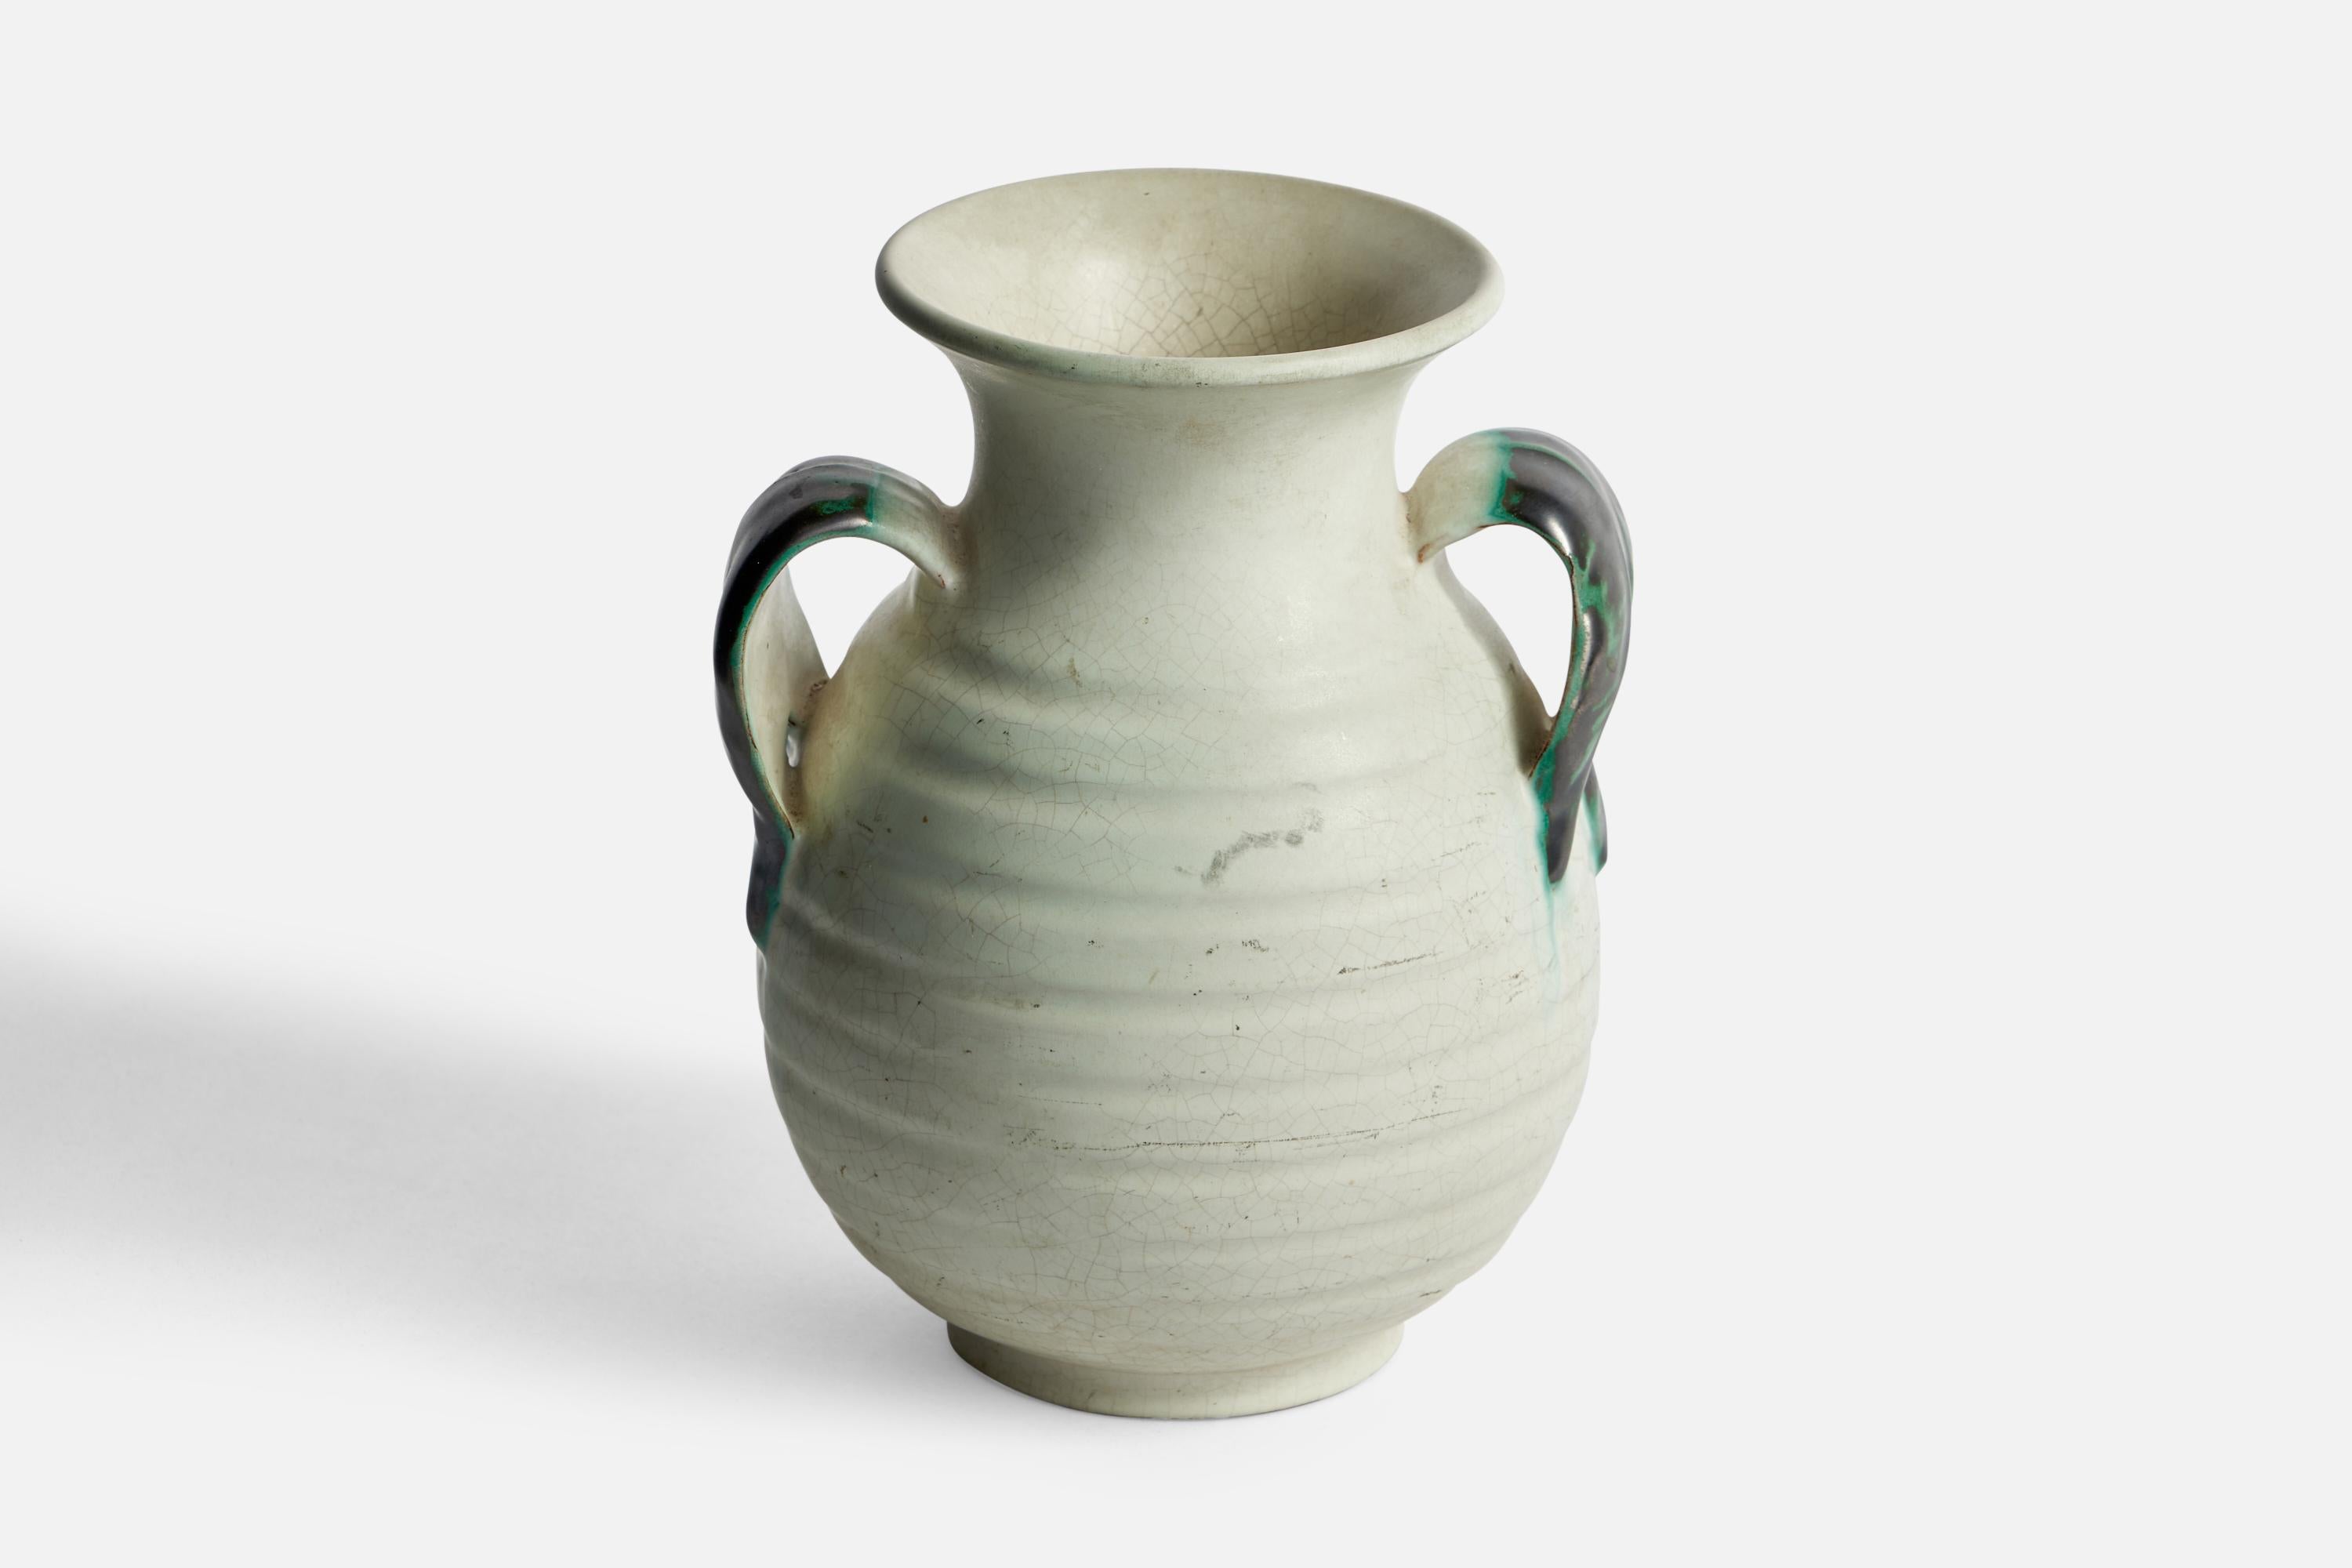 A green and off-white-glazed vase designed and produced by Upsala Ekeby, Sweden, 1930s.